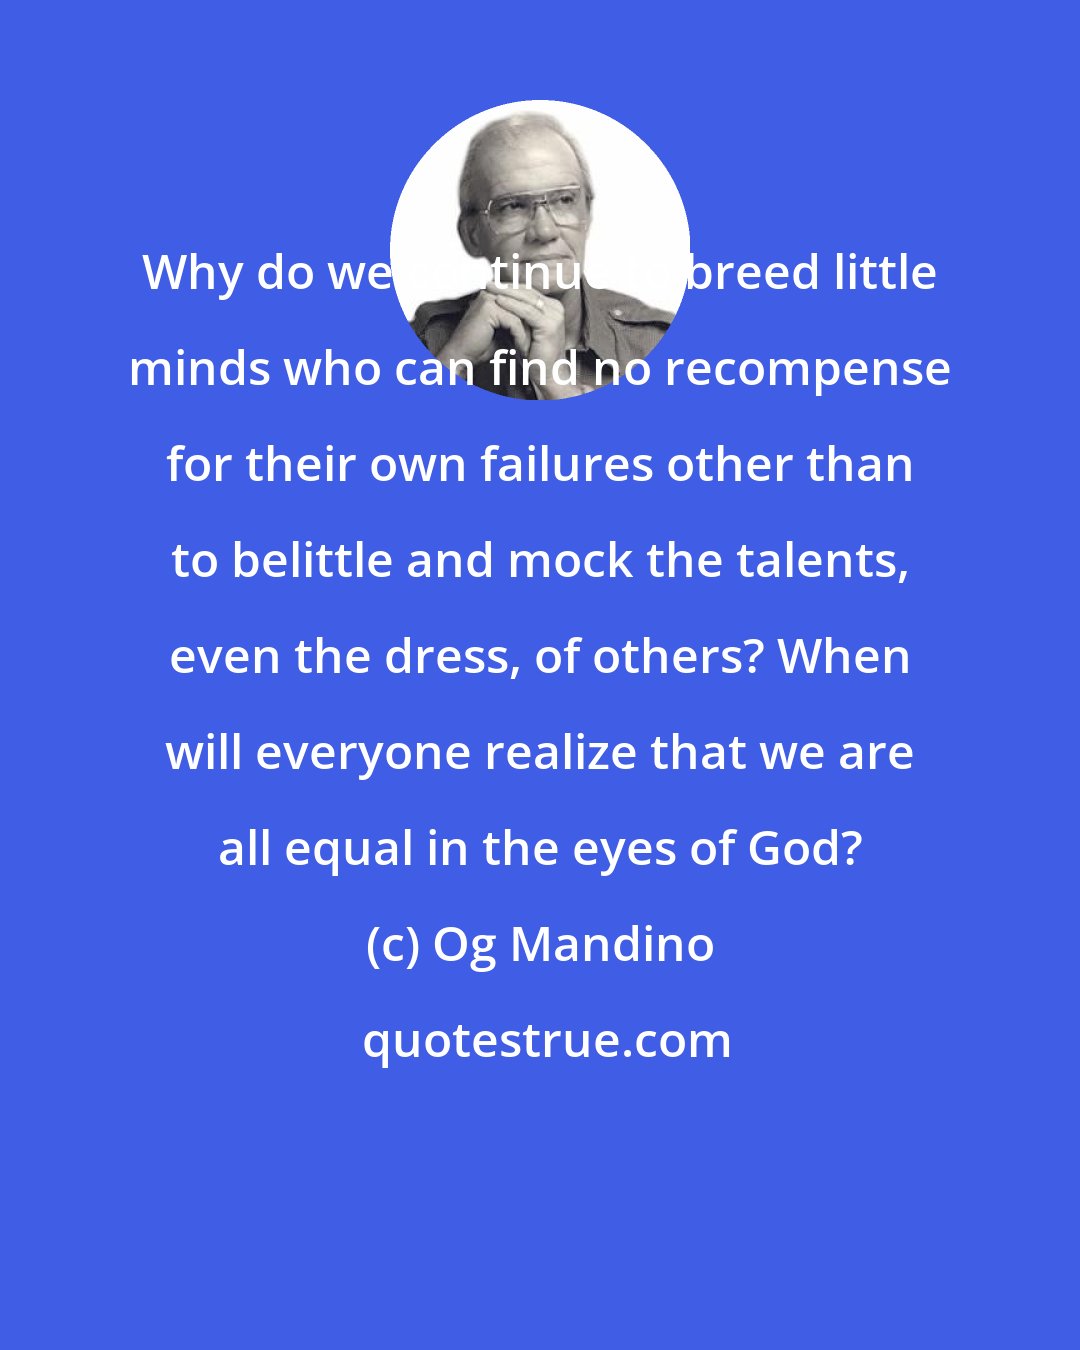 Og Mandino: Why do we continue to breed little minds who can find no recompense for their own failures other than to belittle and mock the talents, even the dress, of others? When will everyone realize that we are all equal in the eyes of God?